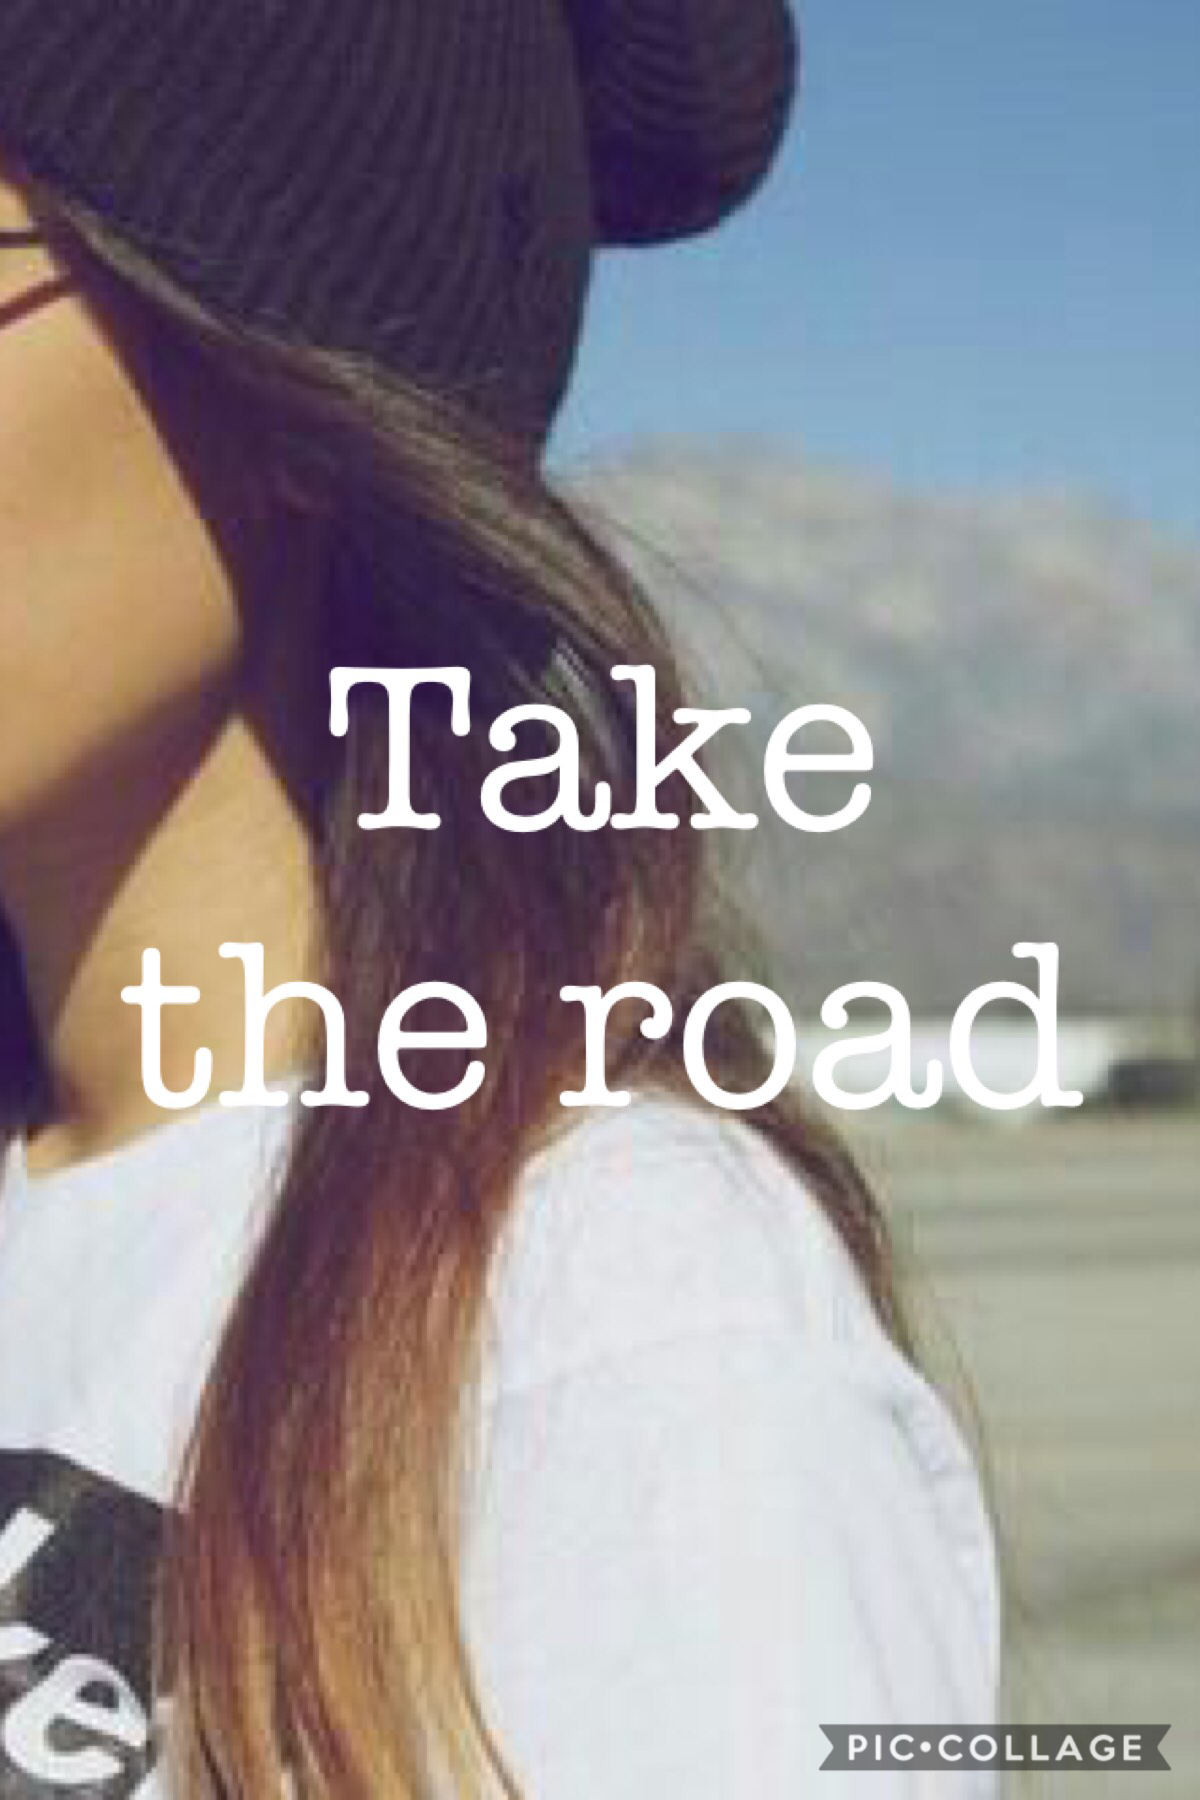 Take the road and tap the heart button